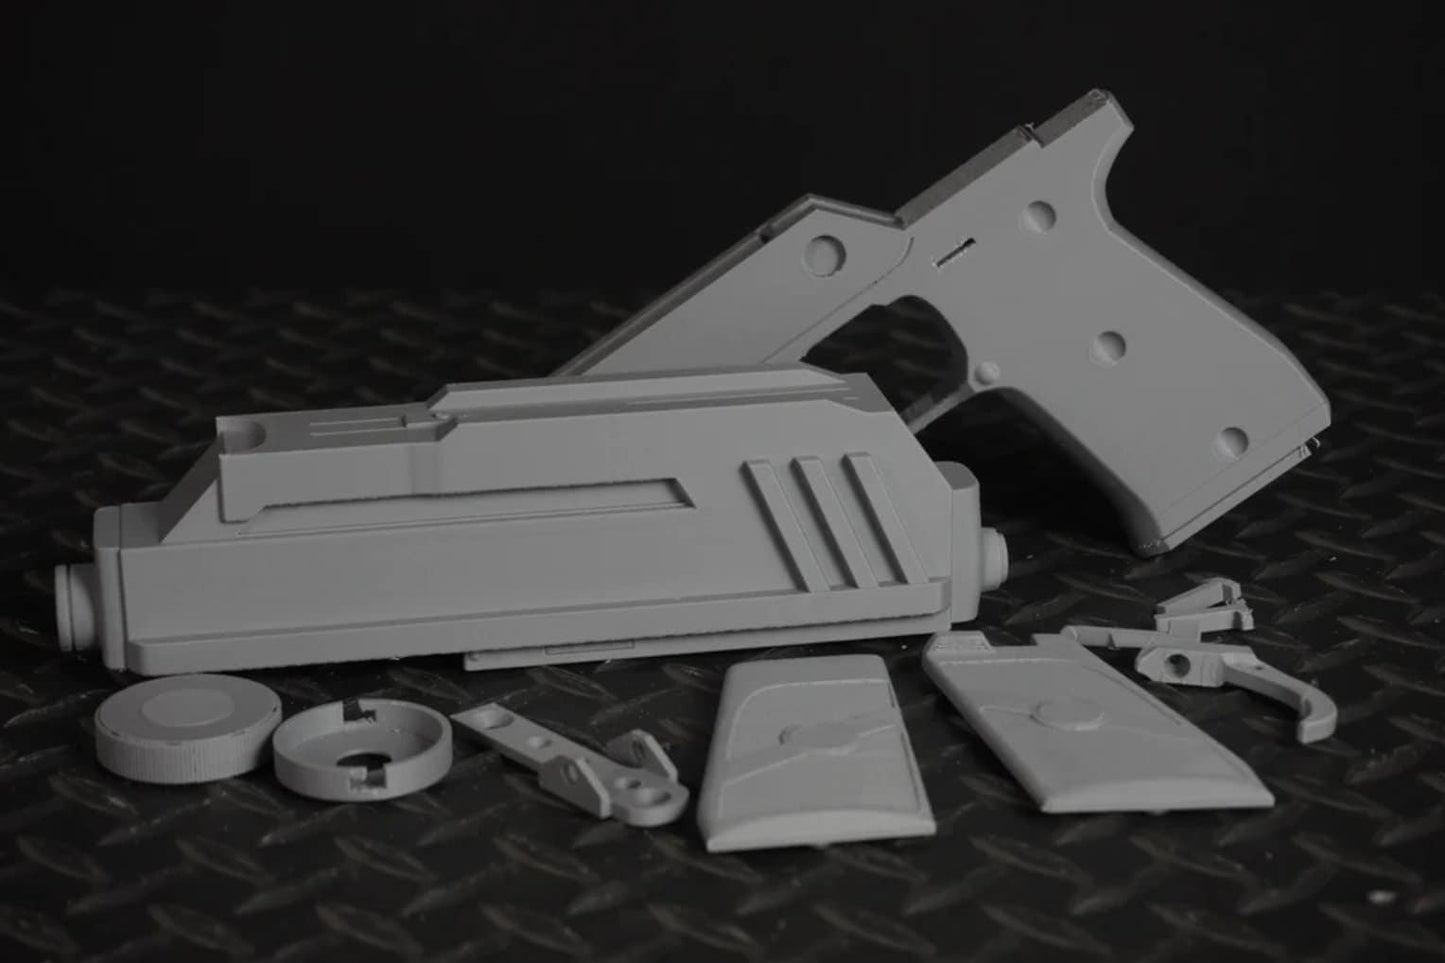 DC-17 Blaster Replica - 3D Printed Prop For Cosplay & Display / Captain Rex / Clone Officers / Jet Troopers